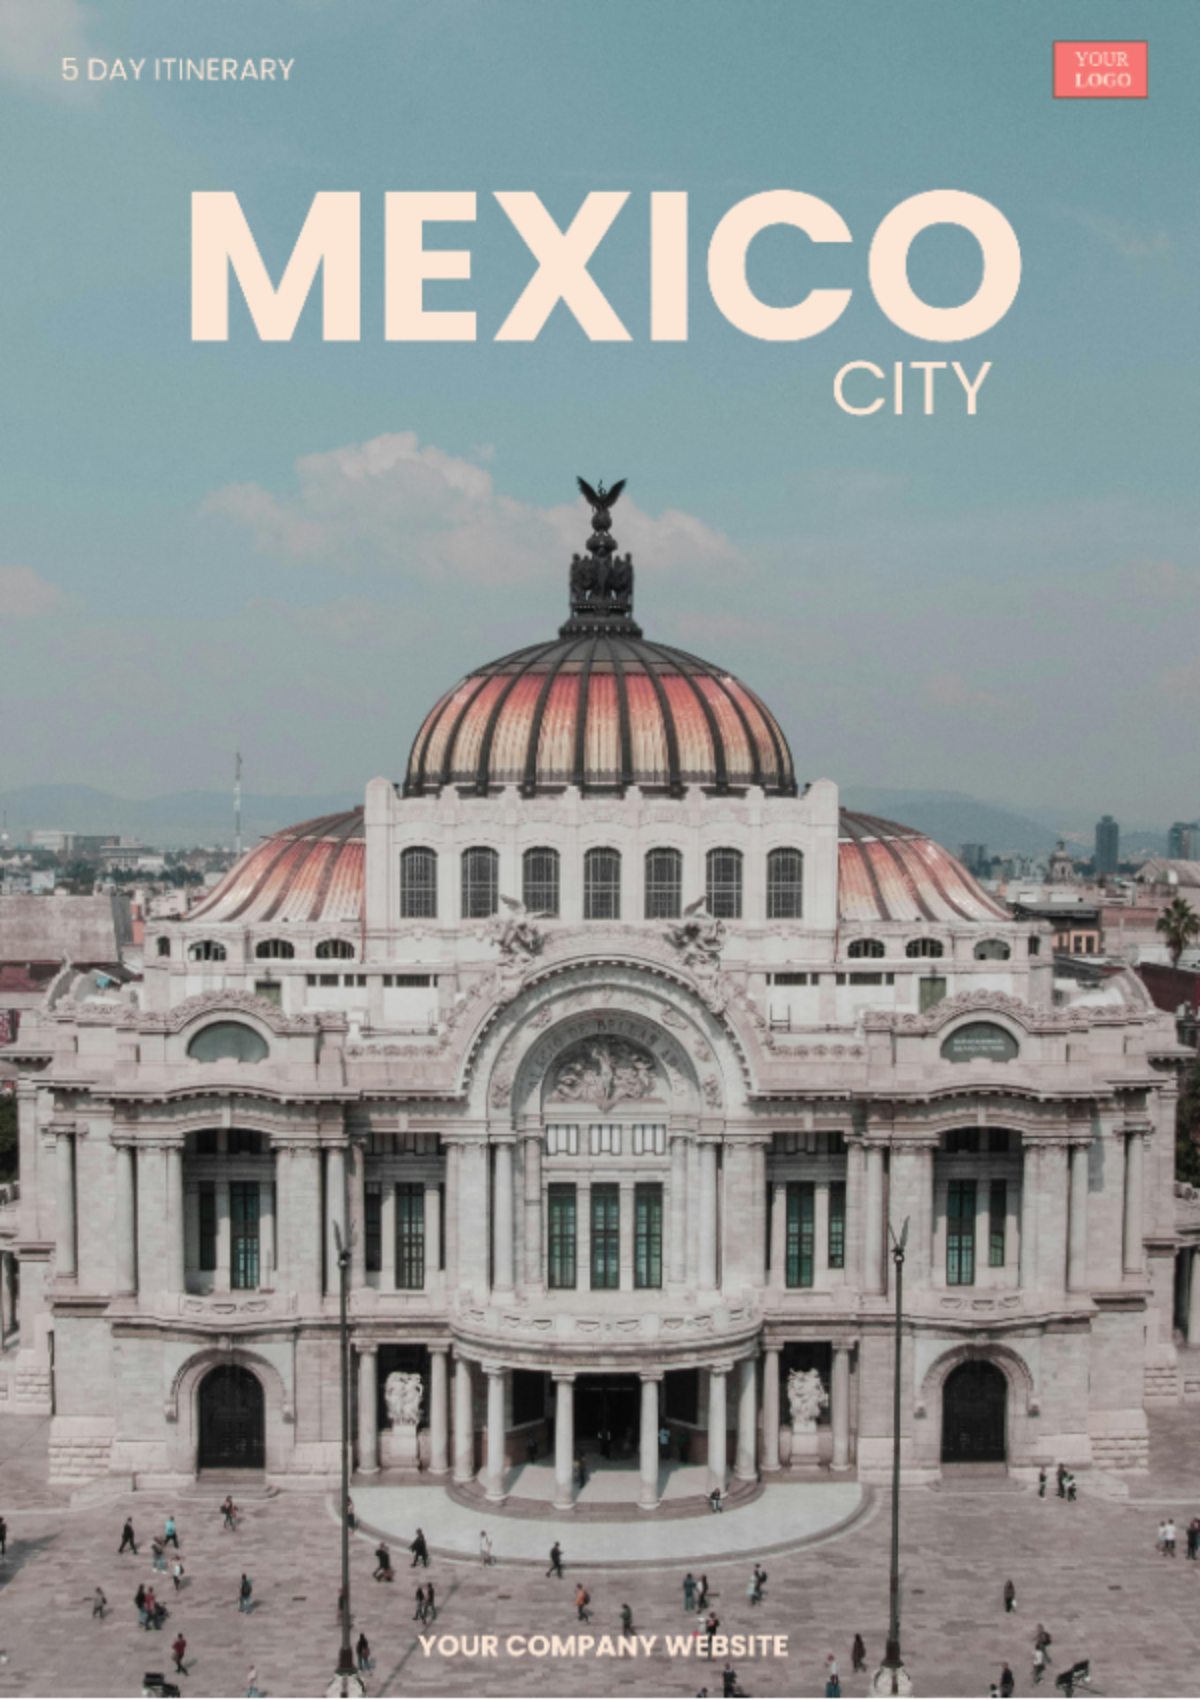 5 Day Mexico City Itinerary Template